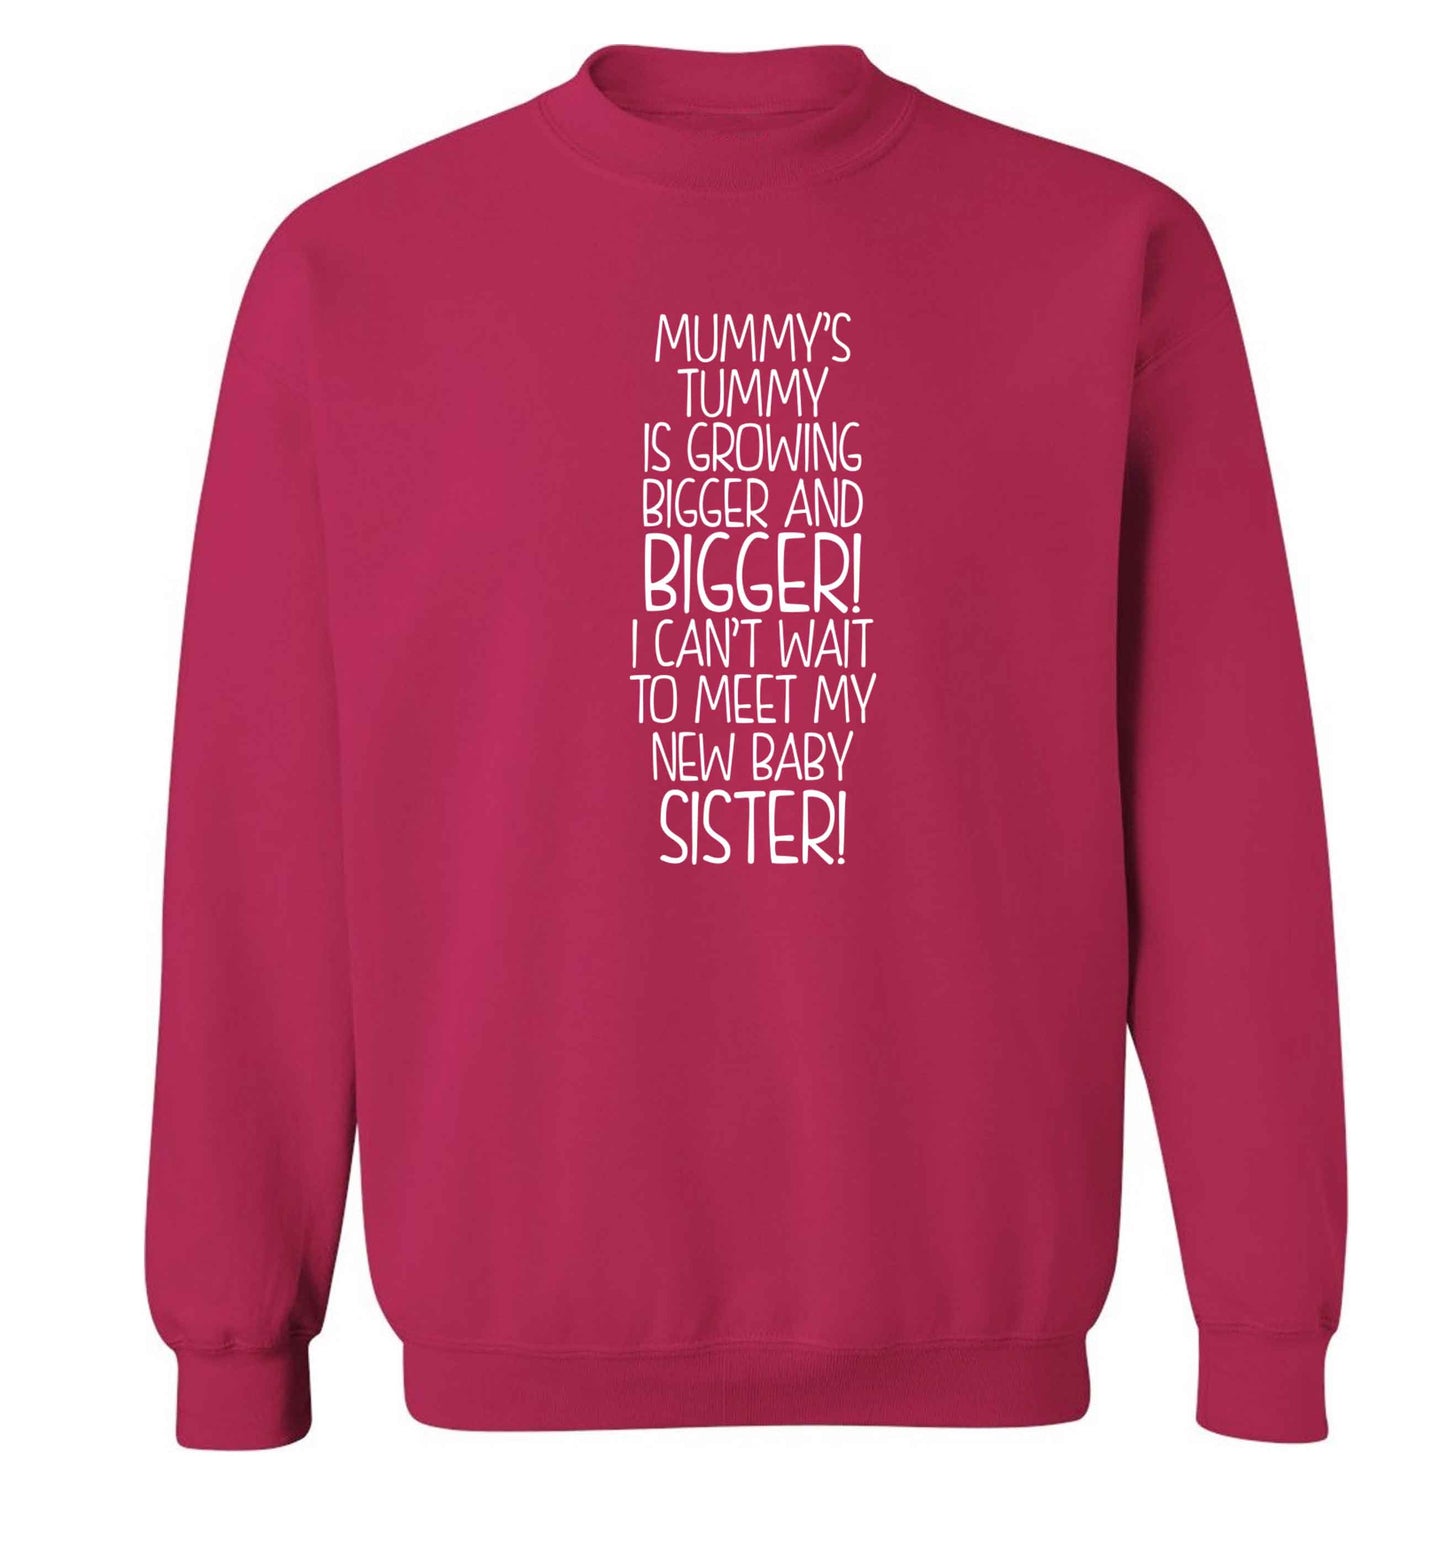 Mummy's tummy is growing bigger and bigger I can't wait to meet my new baby sister! Adult's unisex pink Sweater 2XL